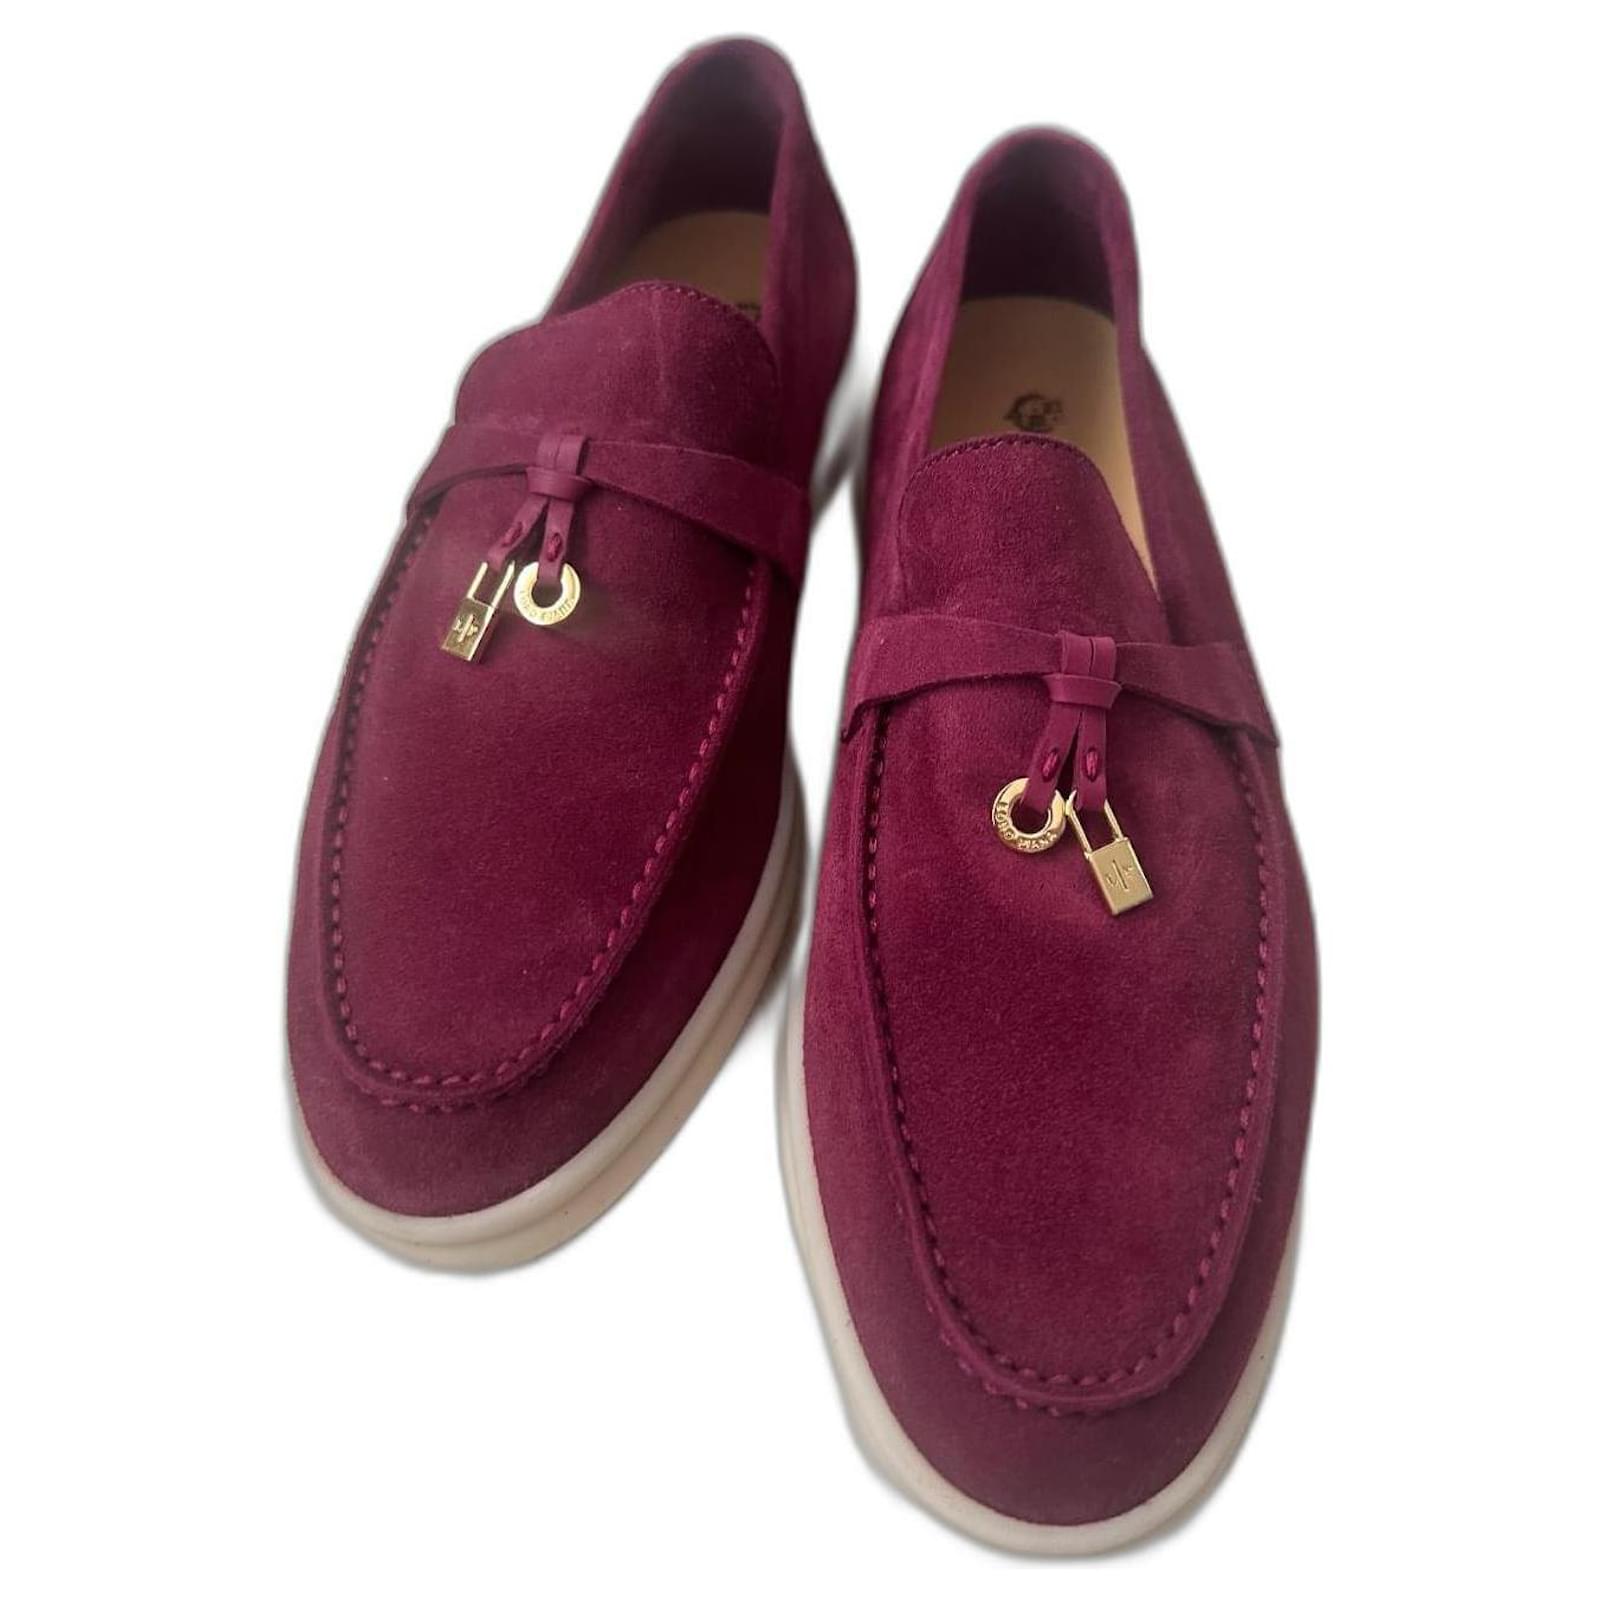 Loro Piana Summer Charms Walk Suede Loafers in Pink